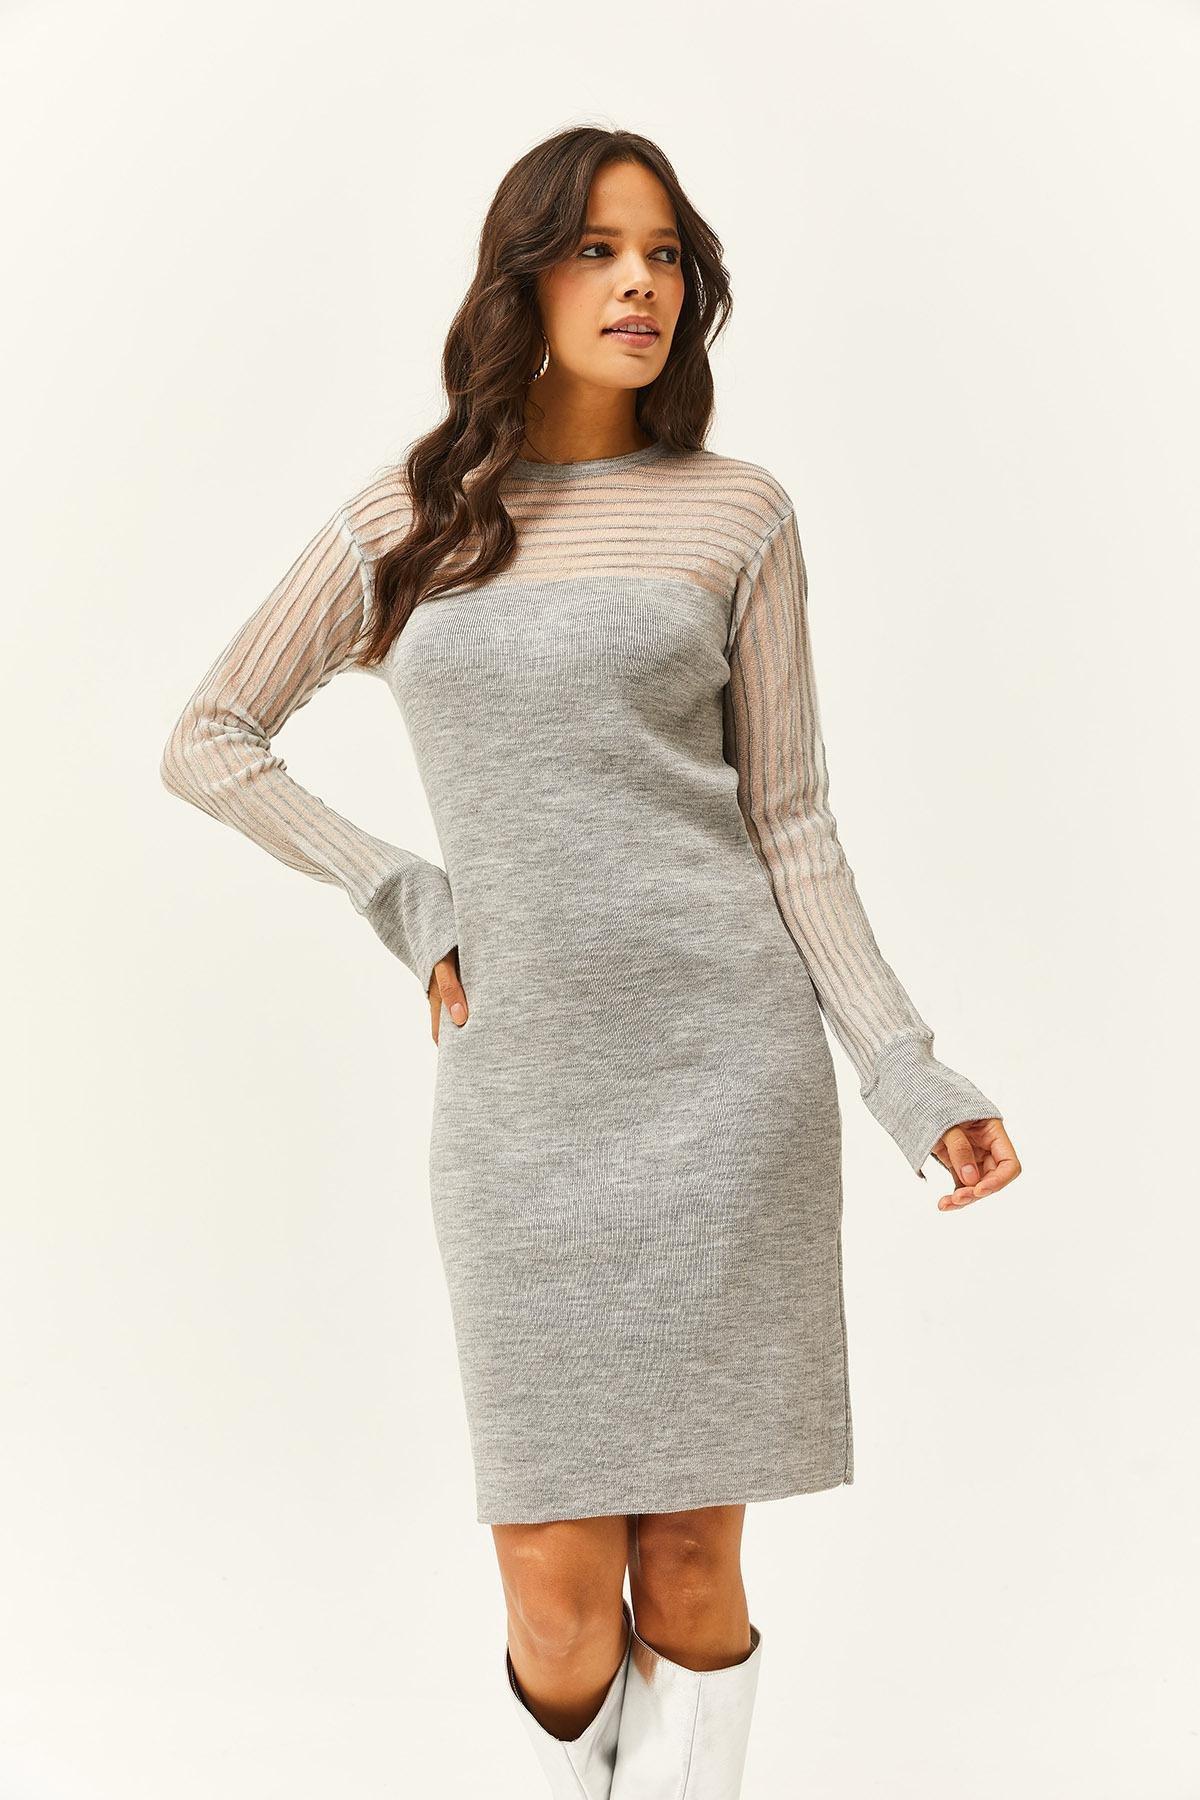 Olalook - Grey Transparent Tulle Mini Knitted Dress